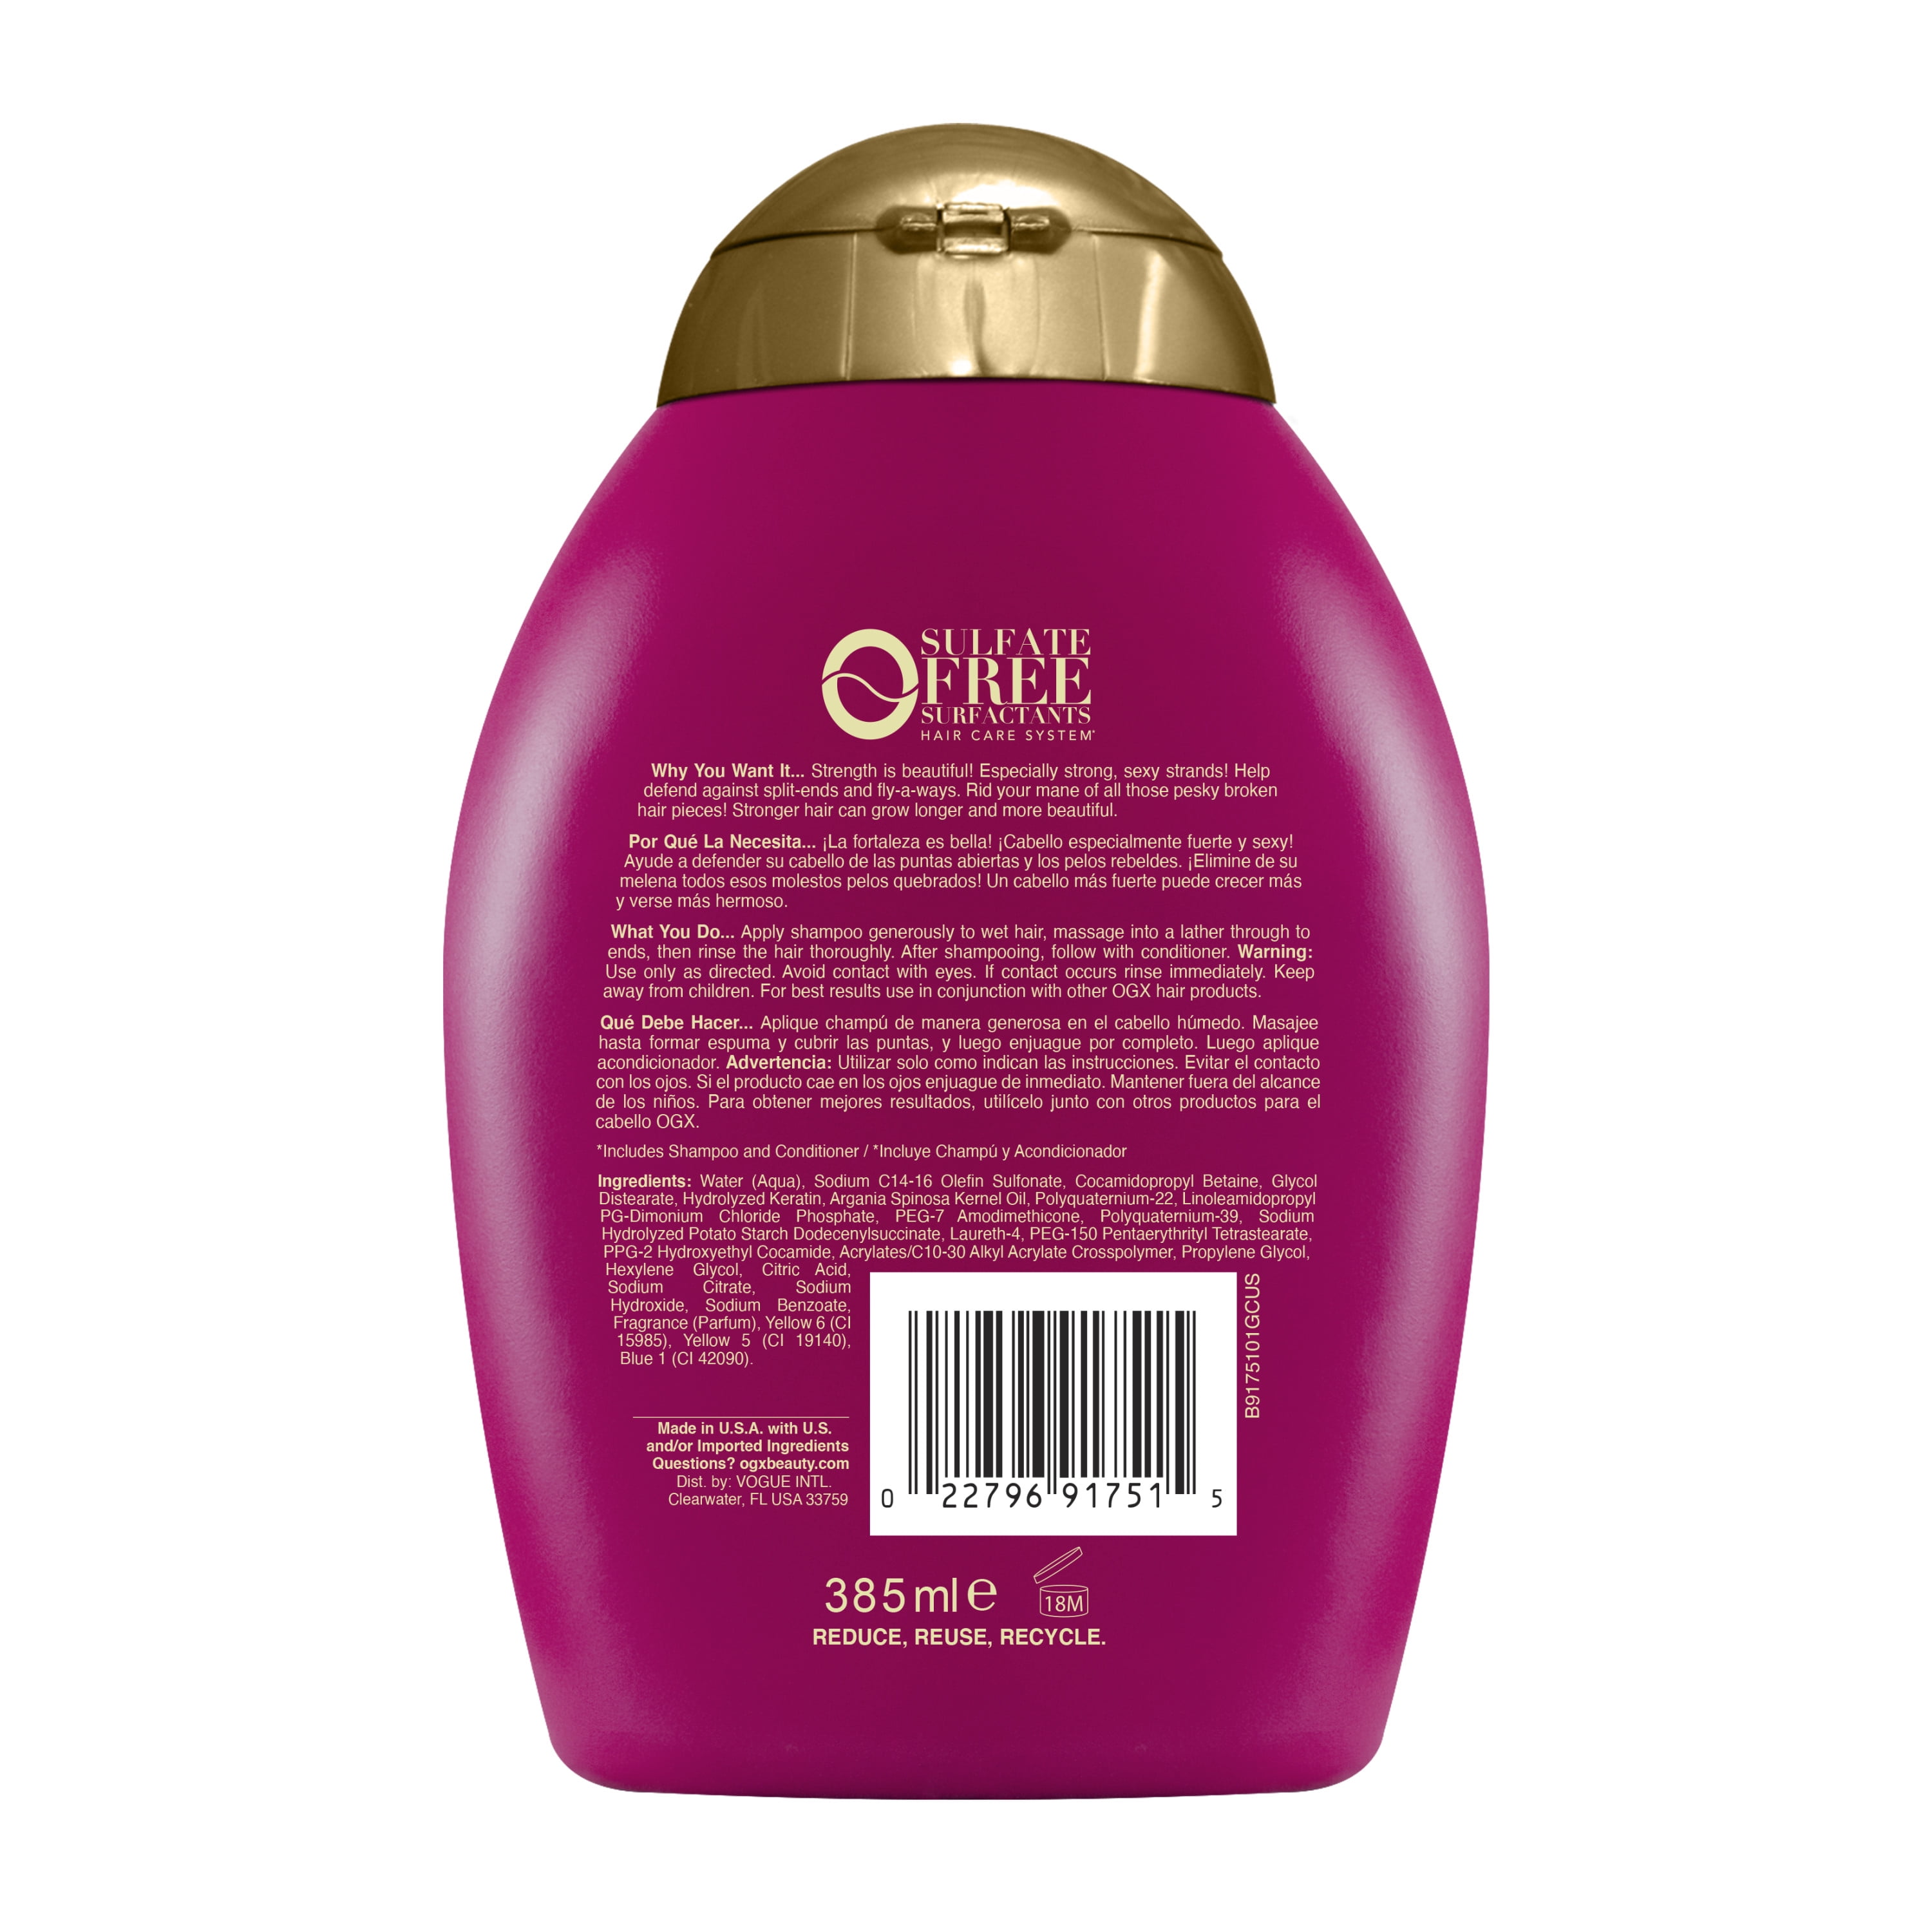 OGX + Oil Fortifying Anti-Frizz Shampoo for Damaged Hair & Split Ends, with Keratin Proteins & Argan Oil, Paraben-Free, Sulfate-Free Surfactants, 13 fl. oz - Walmart.com